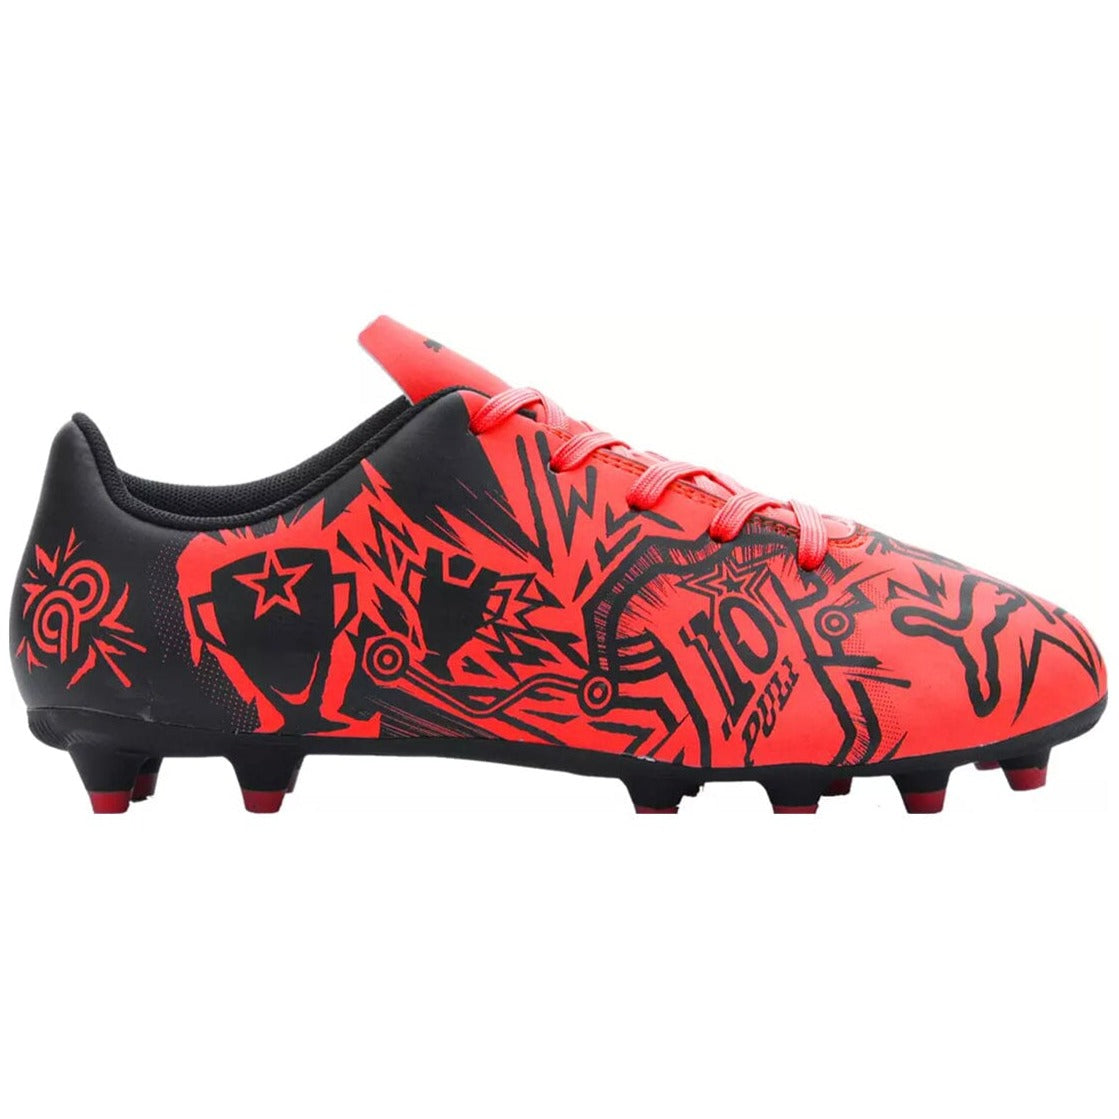 Puma Youth Tacto II FG Soccer Cleats | 10750001 Soccer Shoes Puma 1 Red 